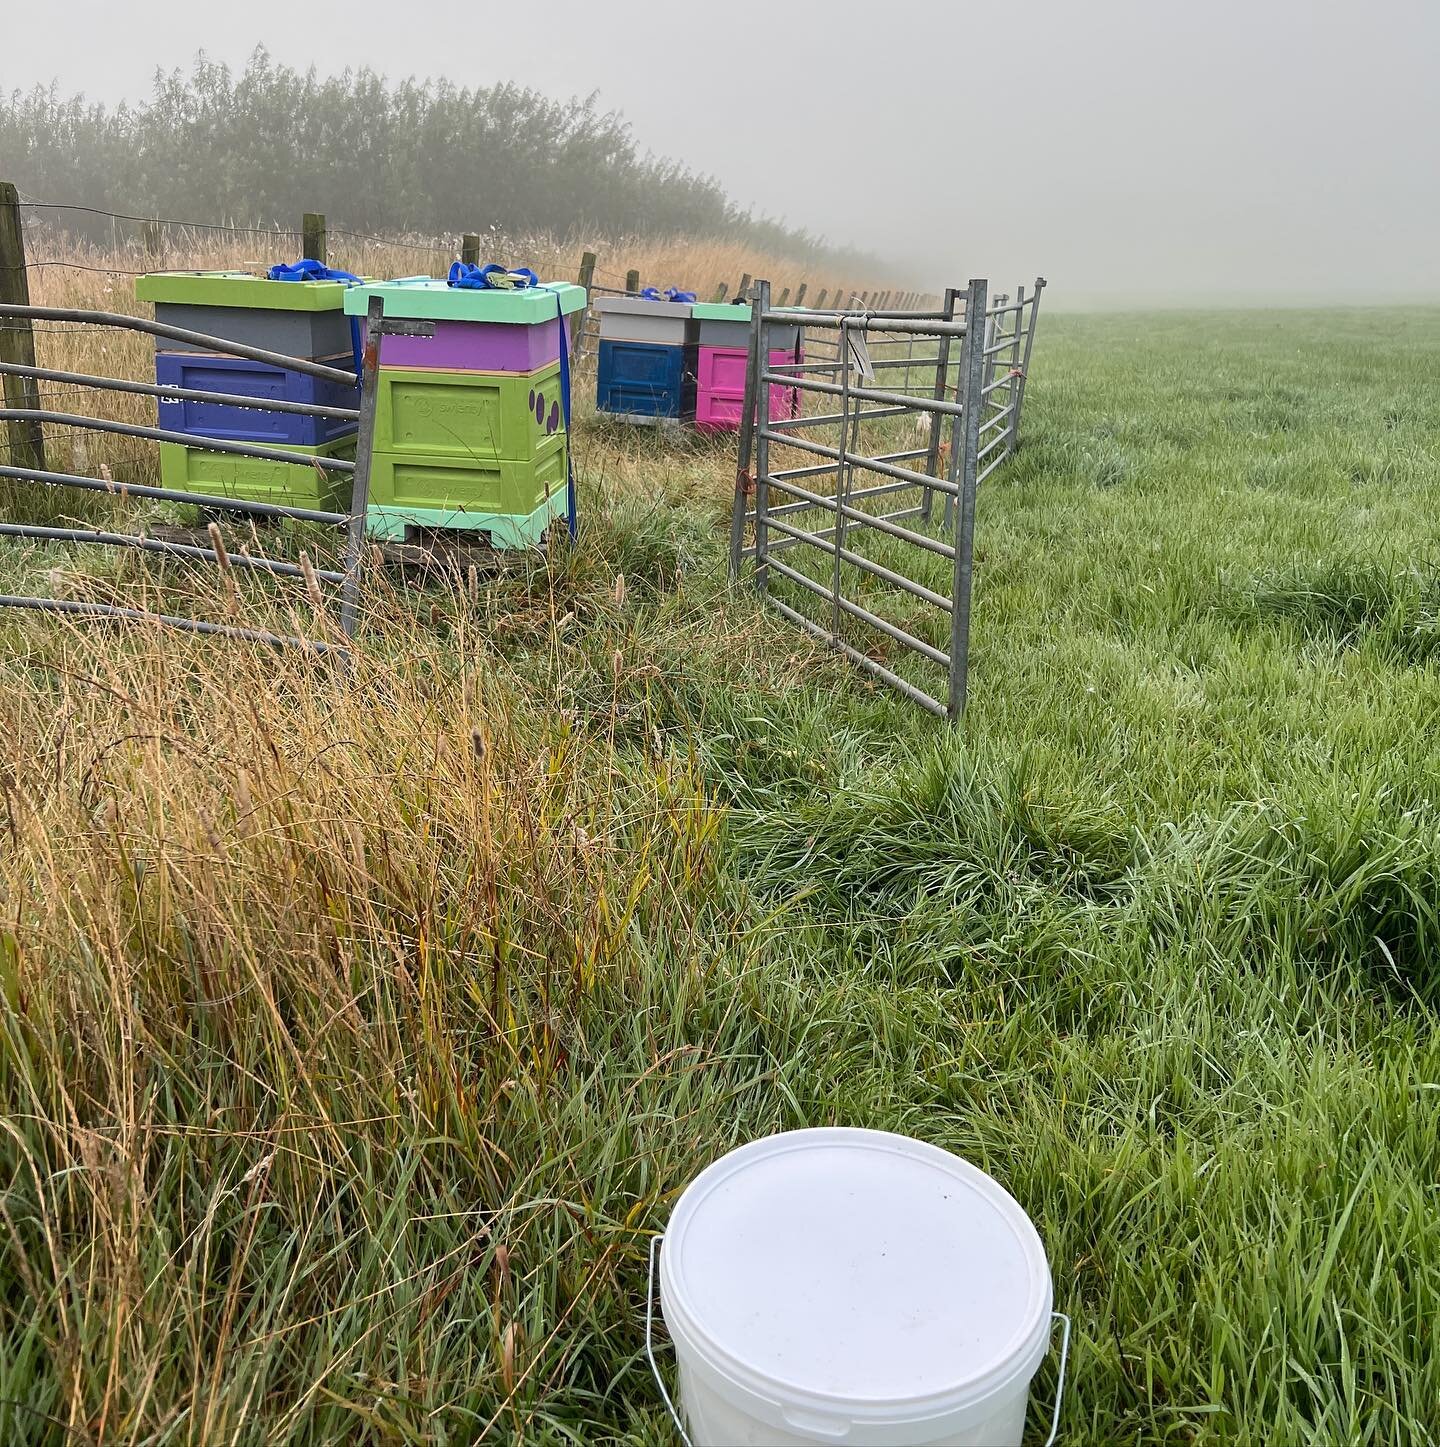 Winter top up feeding has commenced and you can certainly feel this Autumn chill before the mist lifted this morning

🍁🍂🍁

#bees #honey #honeybees #earlystsrts #winterbees